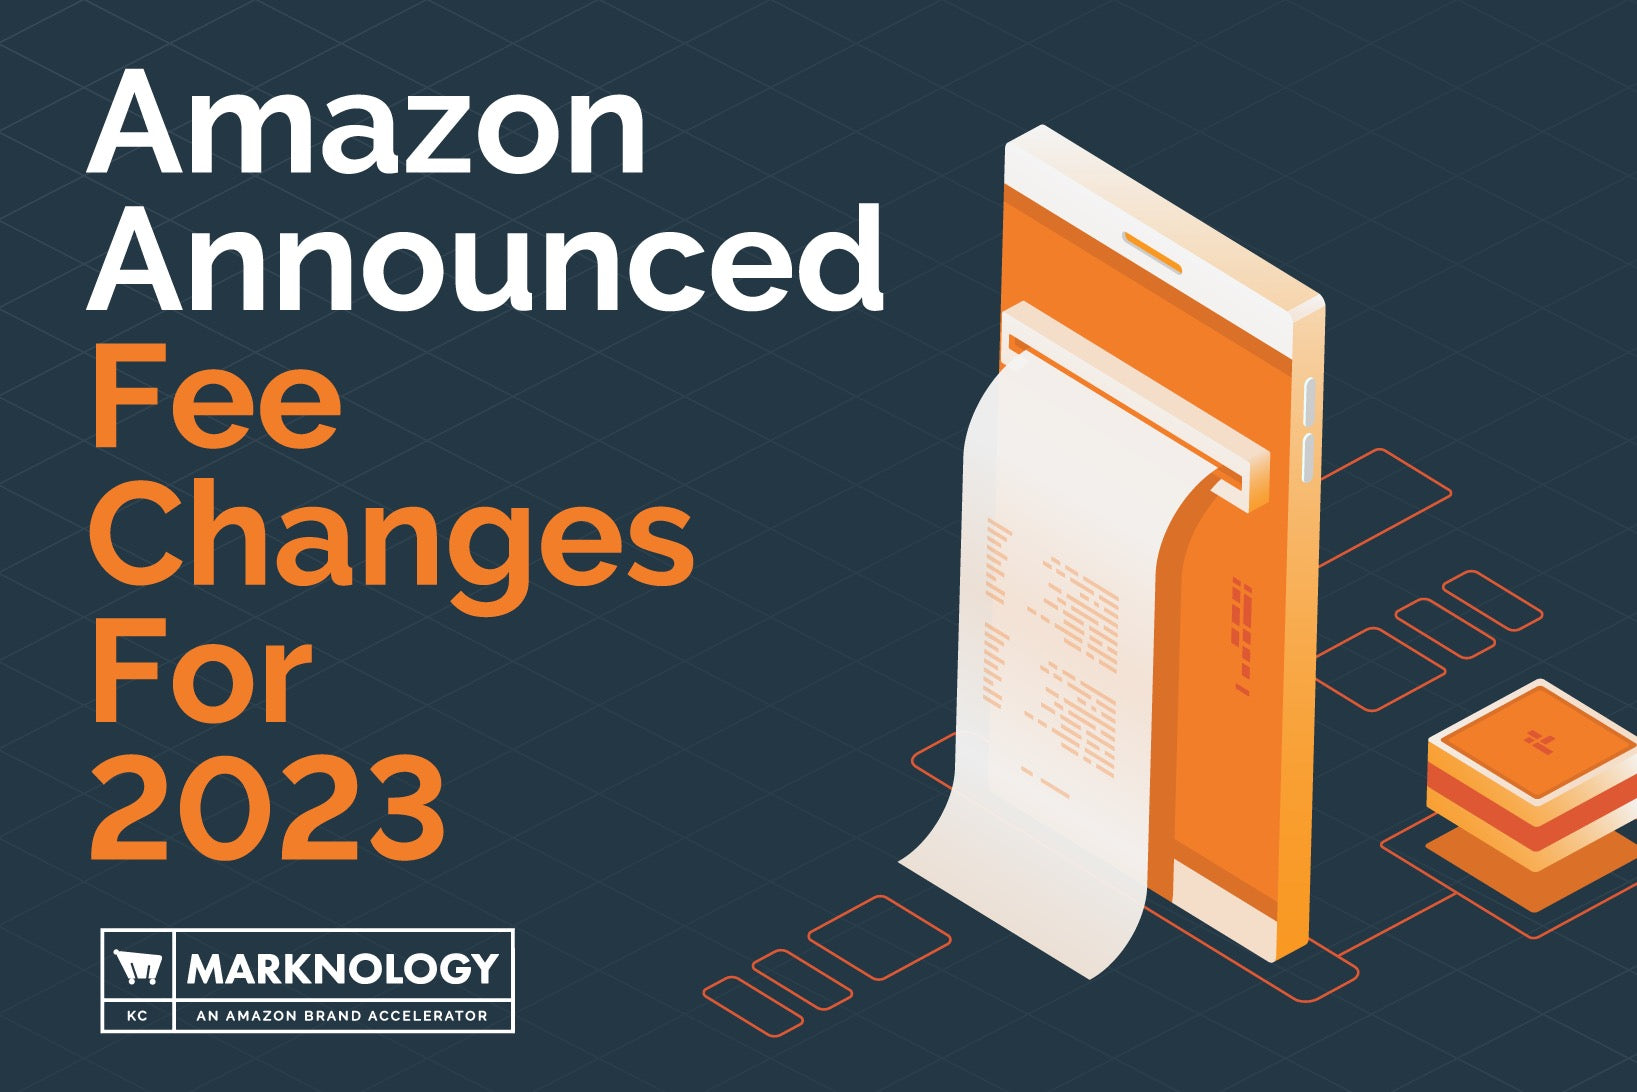 Amazon Announced Fee Changes For 2023